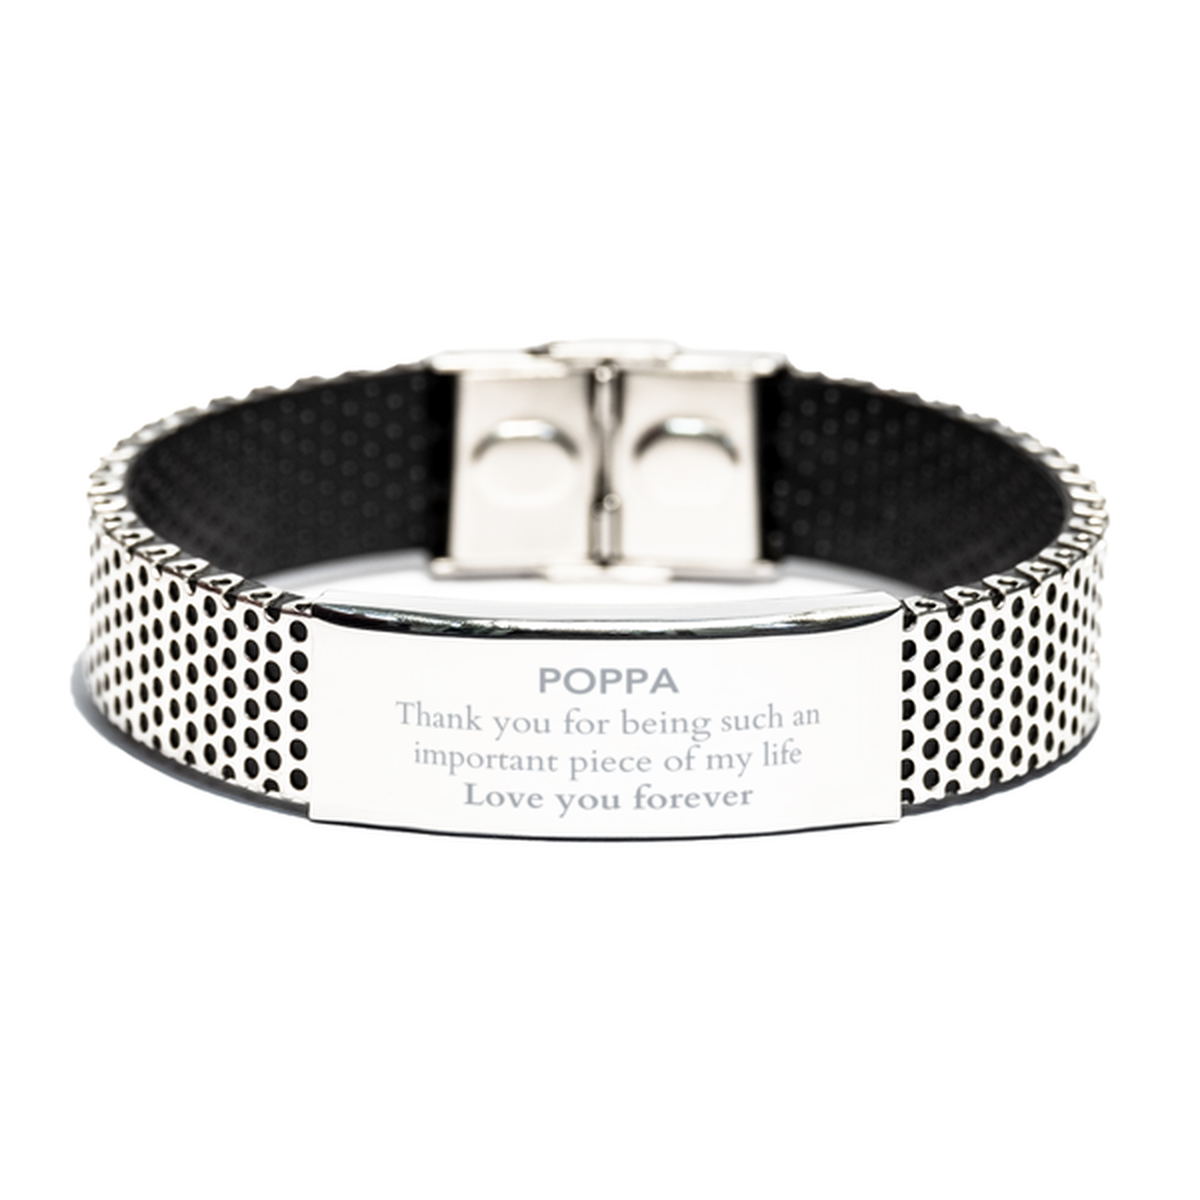 Appropriate Poppa Stainless Steel Bracelet Epic Birthday Gifts for Poppa Thank you for being such an important piece of my life Poppa Christmas Mothers Fathers Day